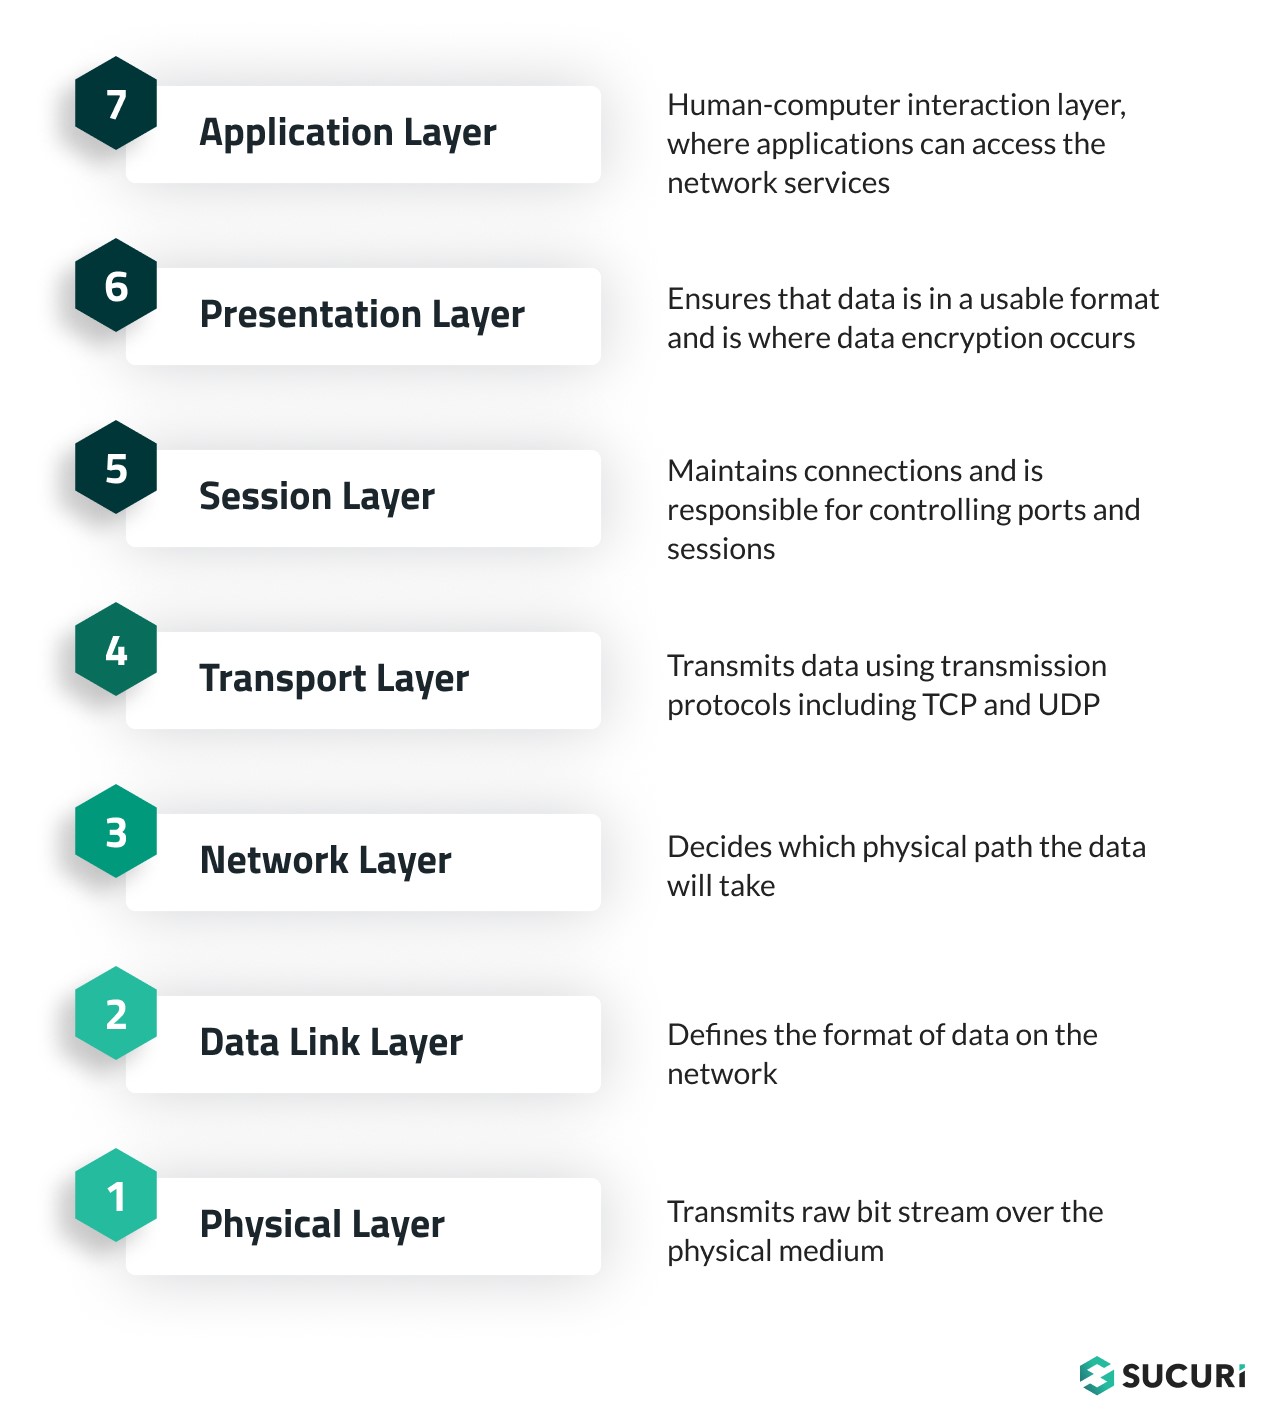 OSI Model Application Layers 1 to 7